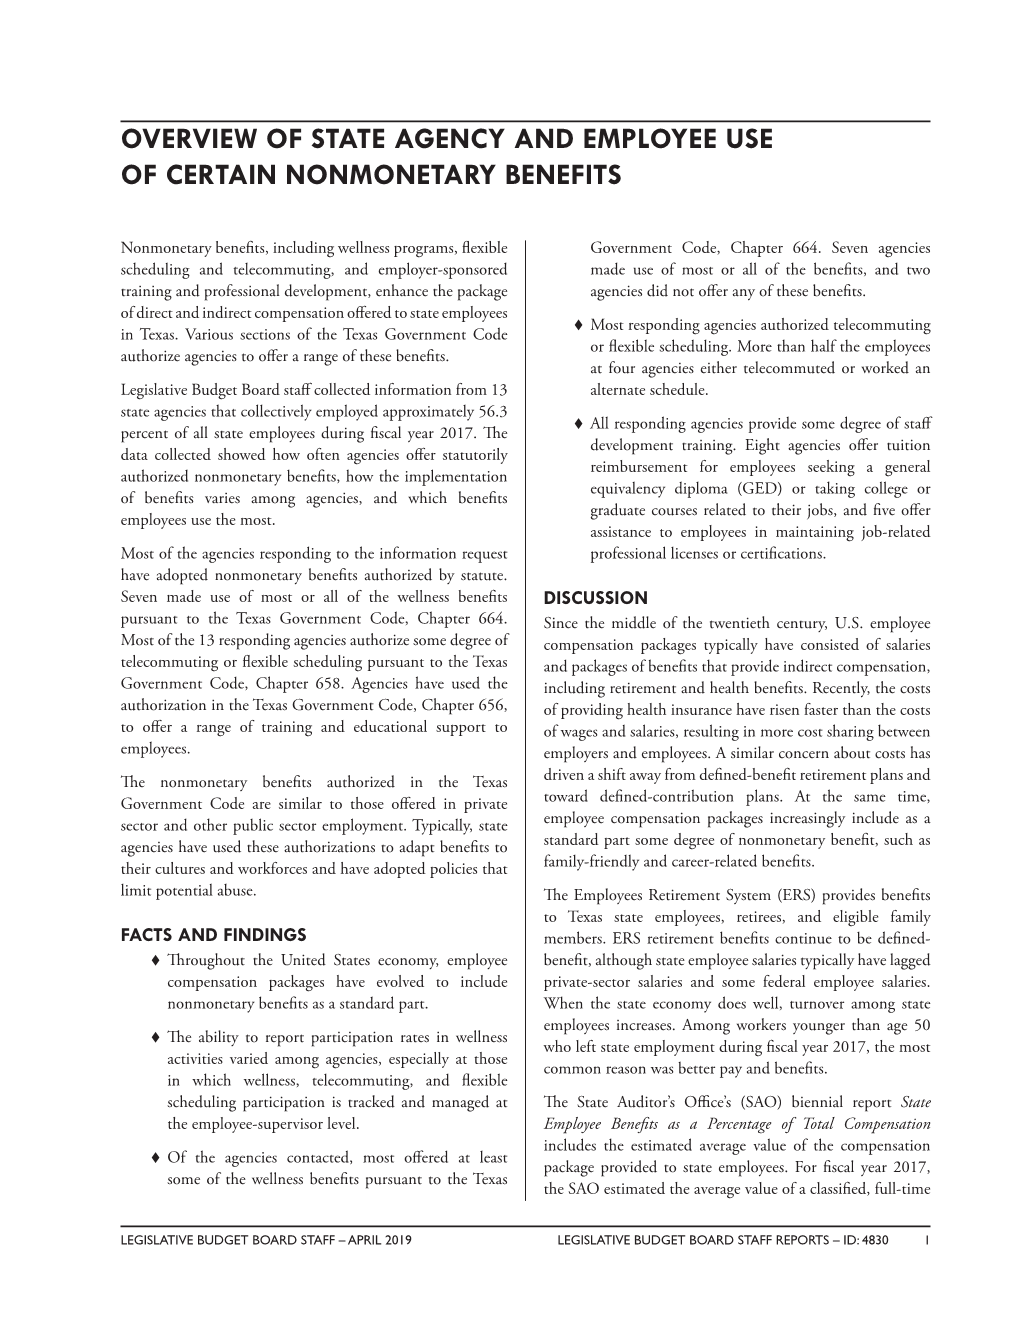 Overview of State Agency and Employee Use of Certain Nonmonetary Benefits